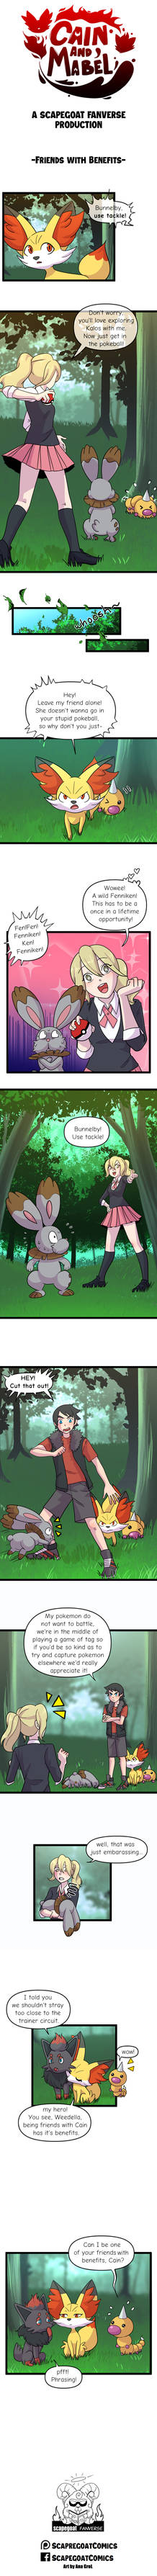 Cain and Mabel A Pokemon Webcomic Page 4